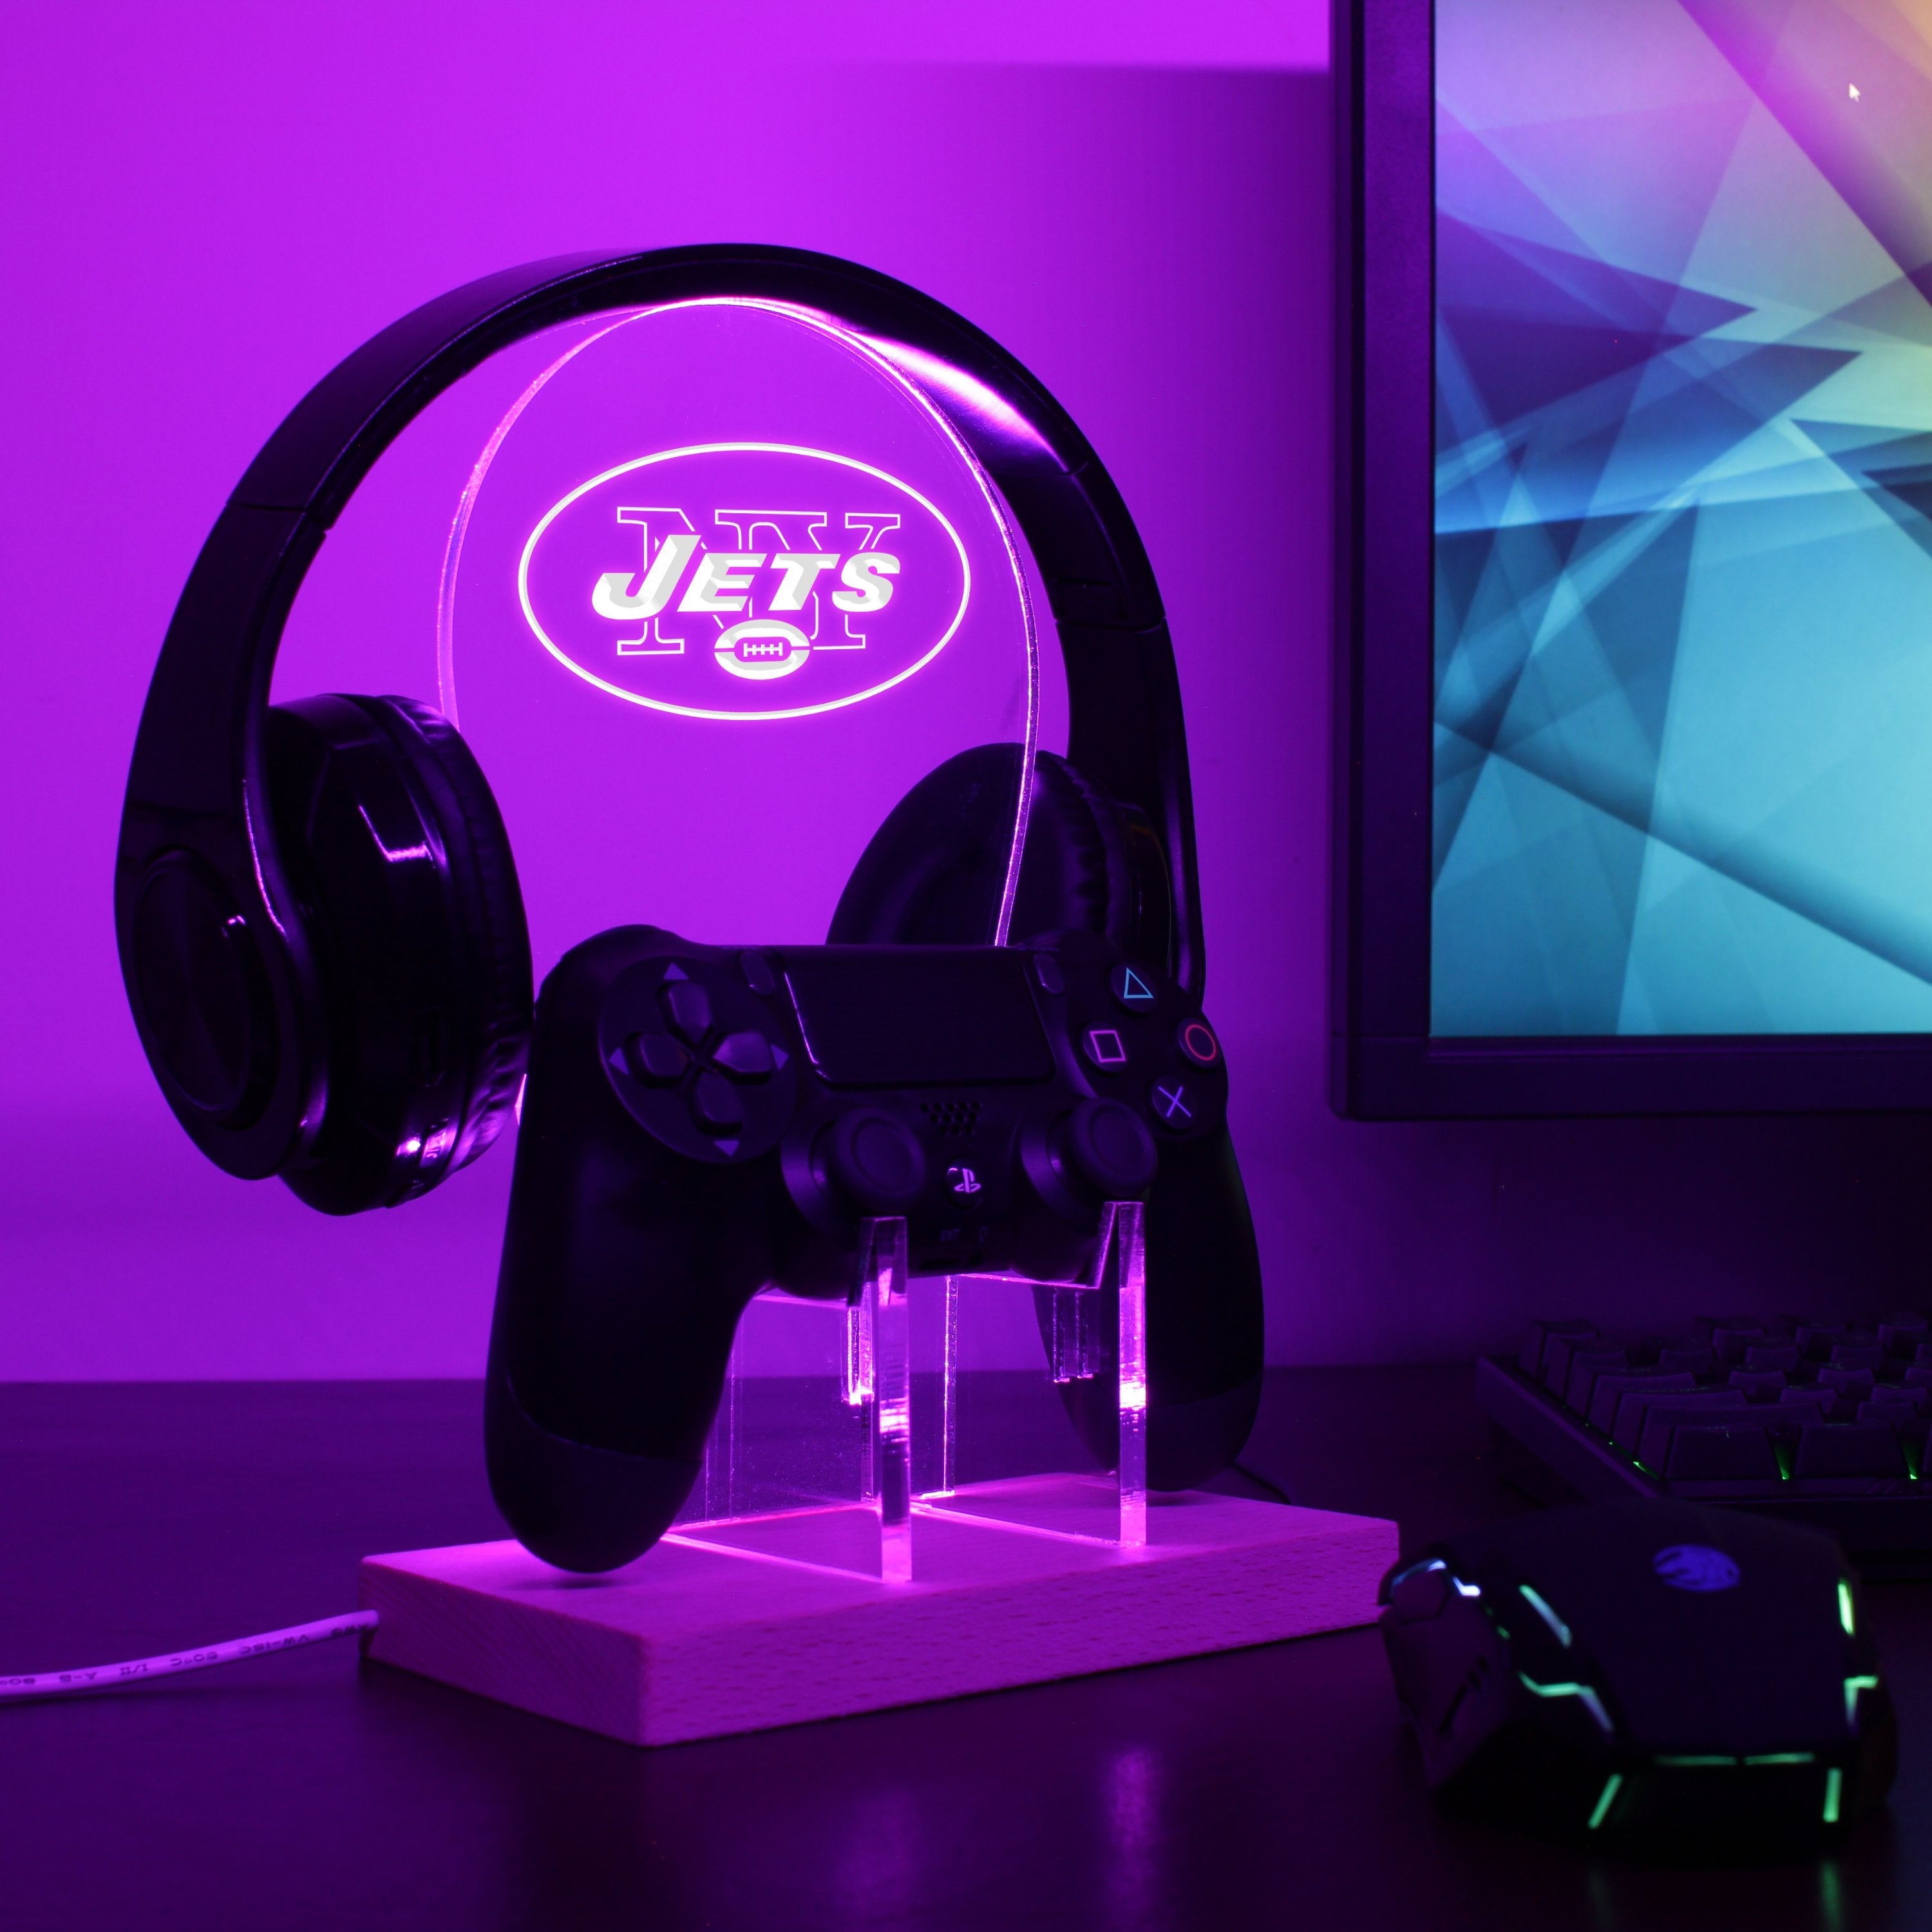 New York Jets LED Gaming Headset Controller Stand